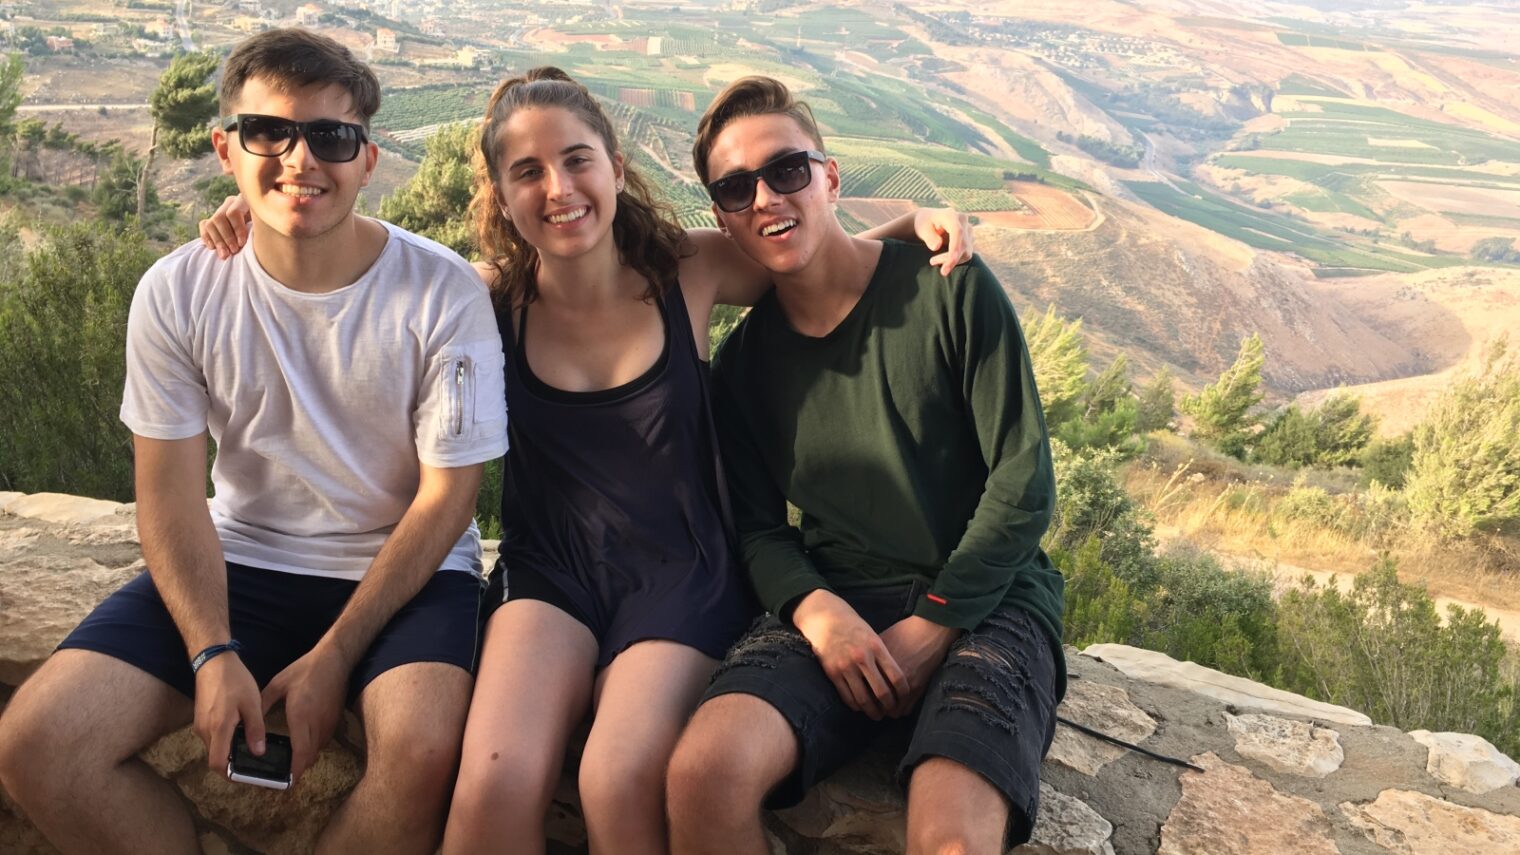 Parker Alchanati, left, with his sister and a friend in the Galilee. Photo: courtesy